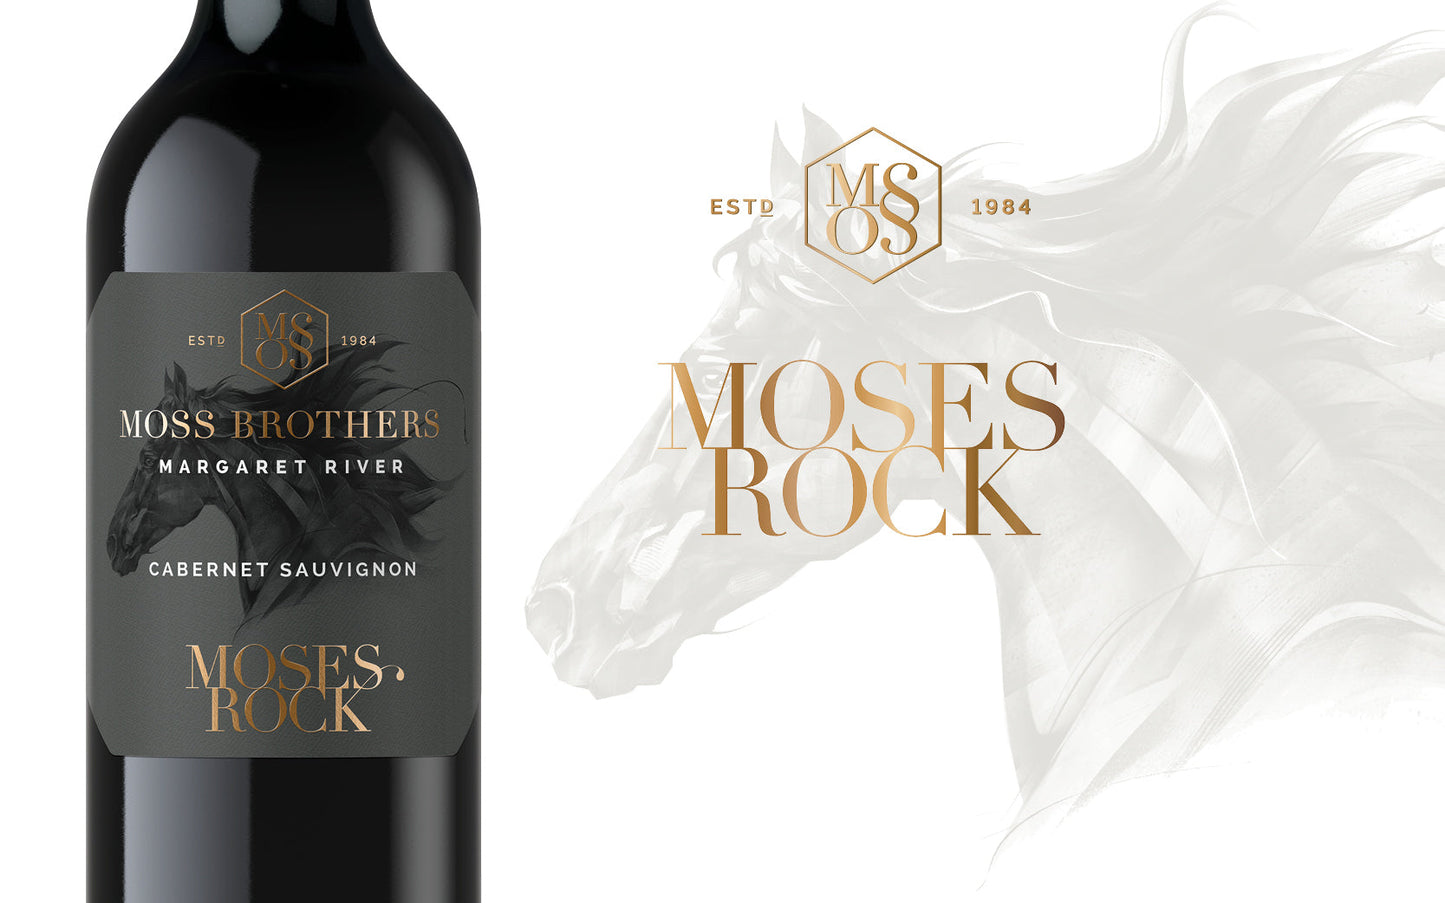 An International Trophy for our Moses Rock Cabernet Sauvignon